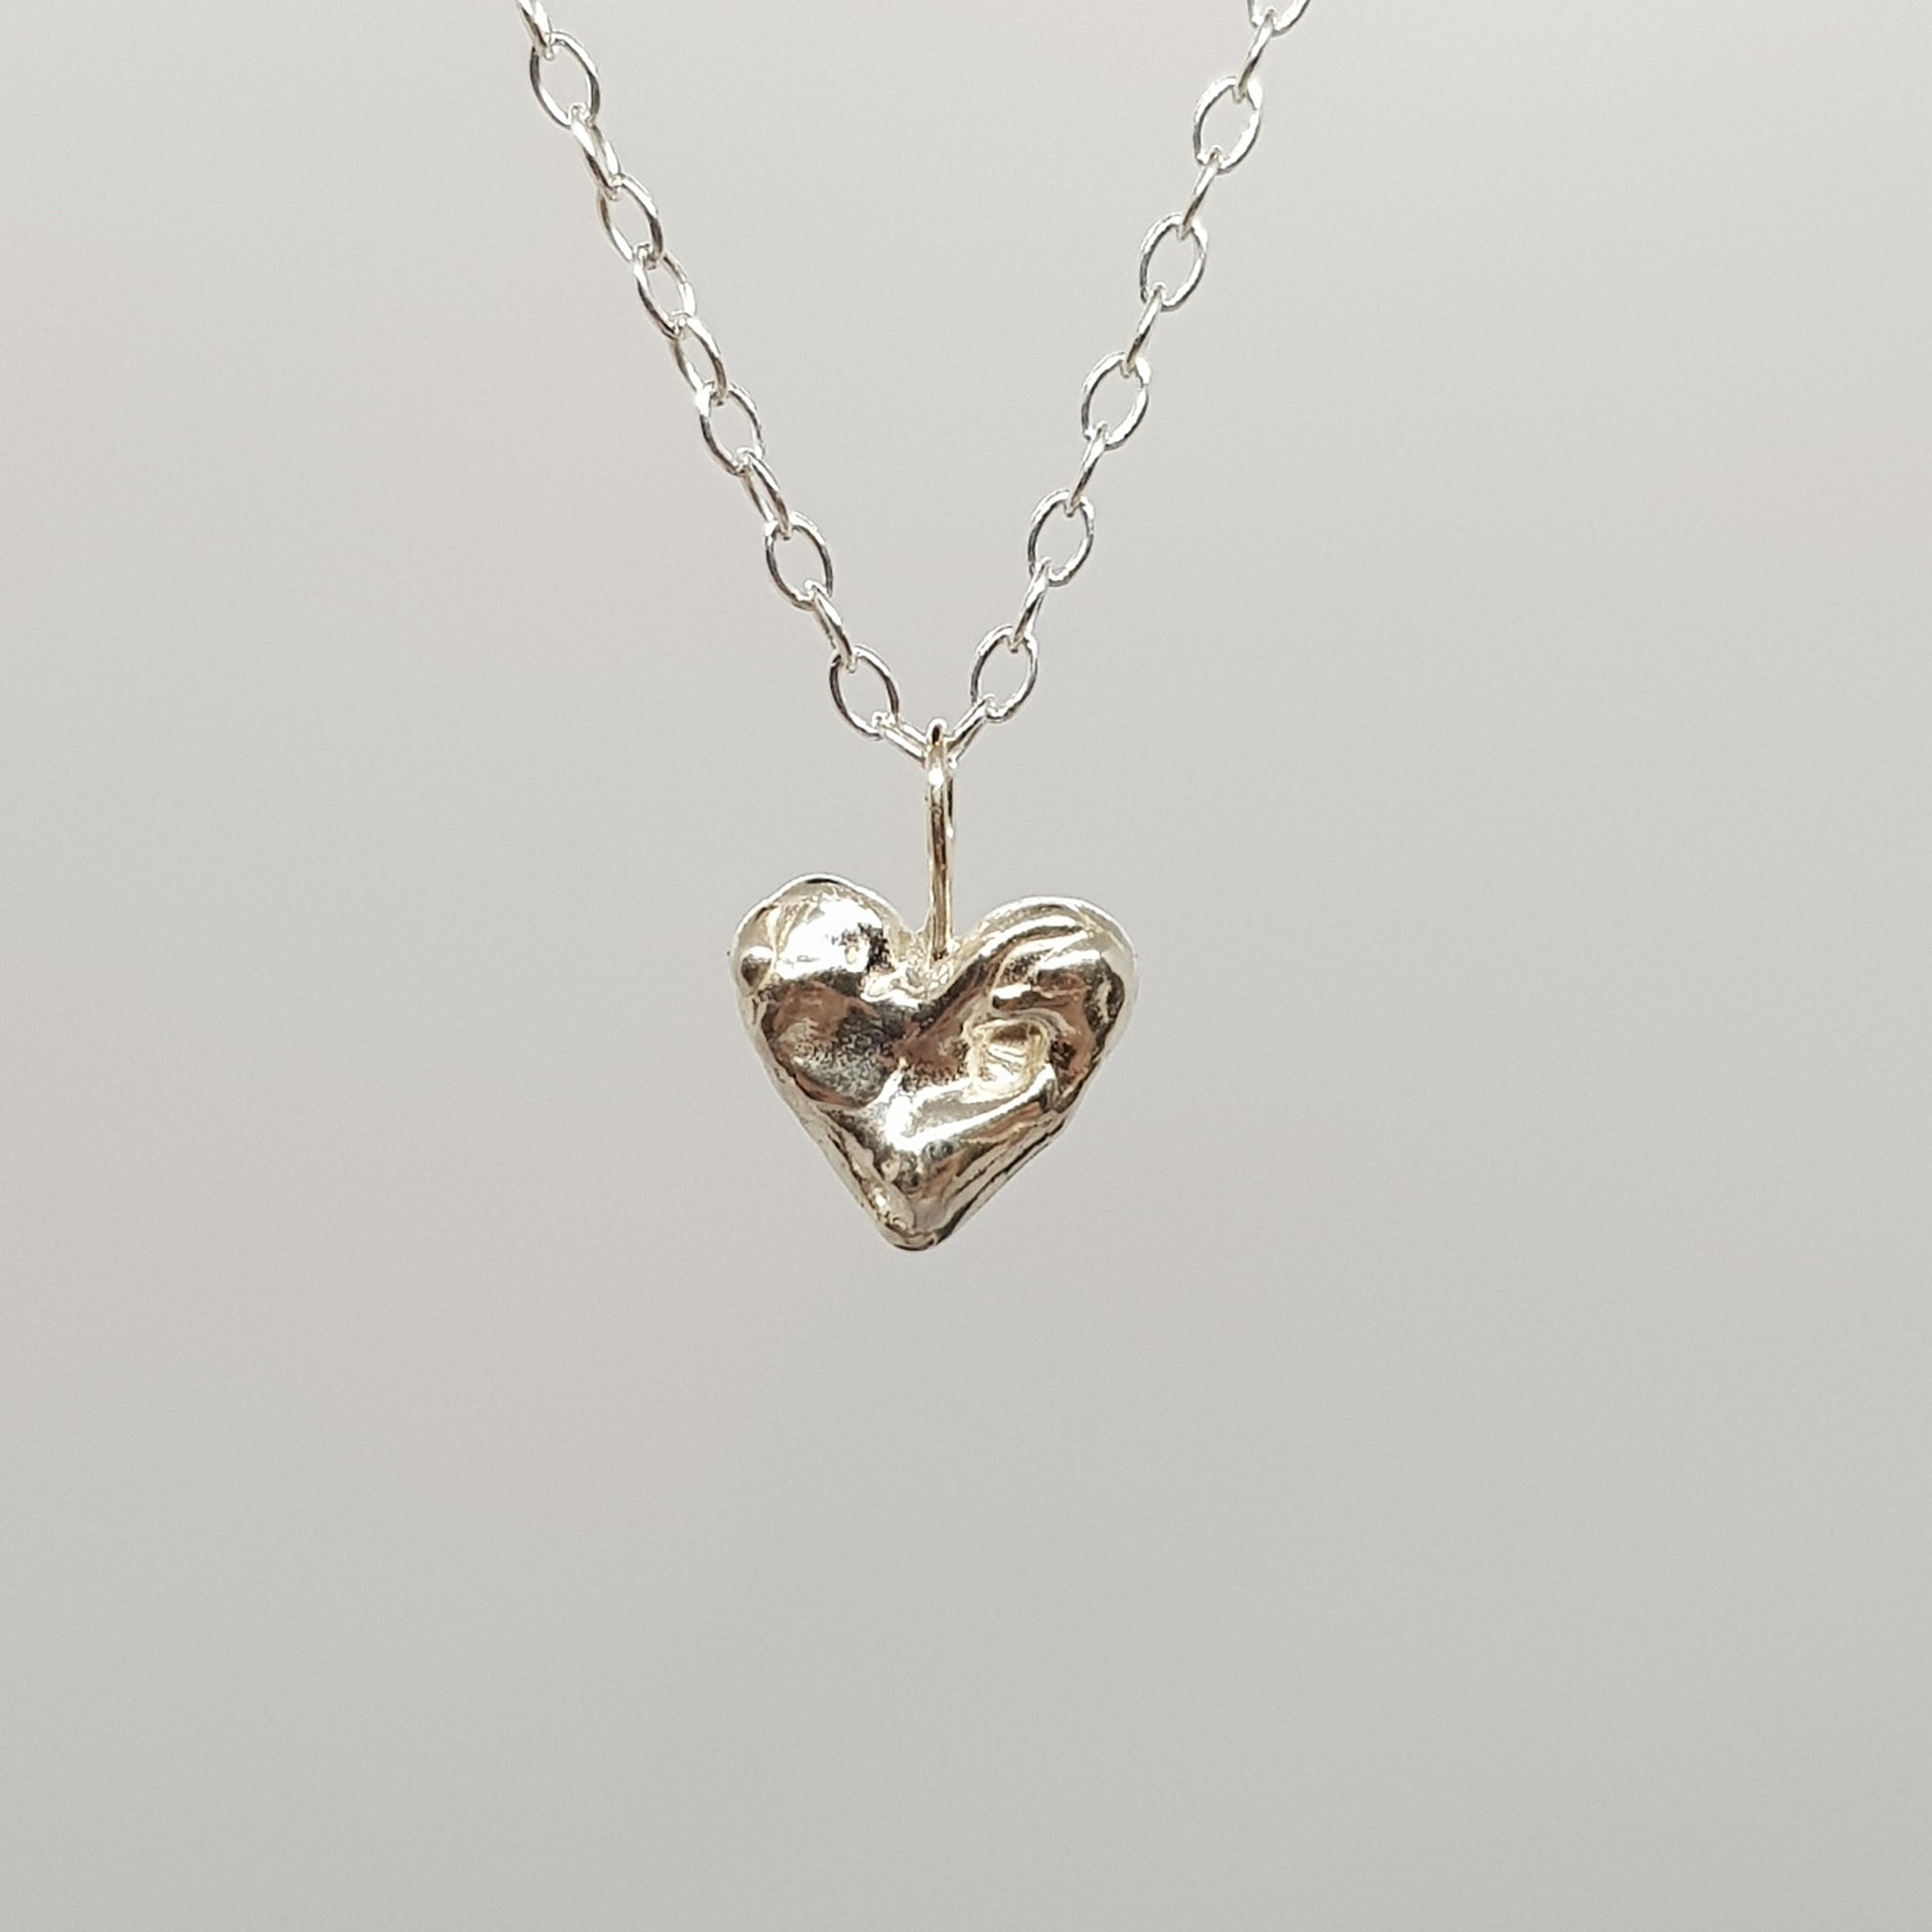 tiny sterling silver blobby heart necklace